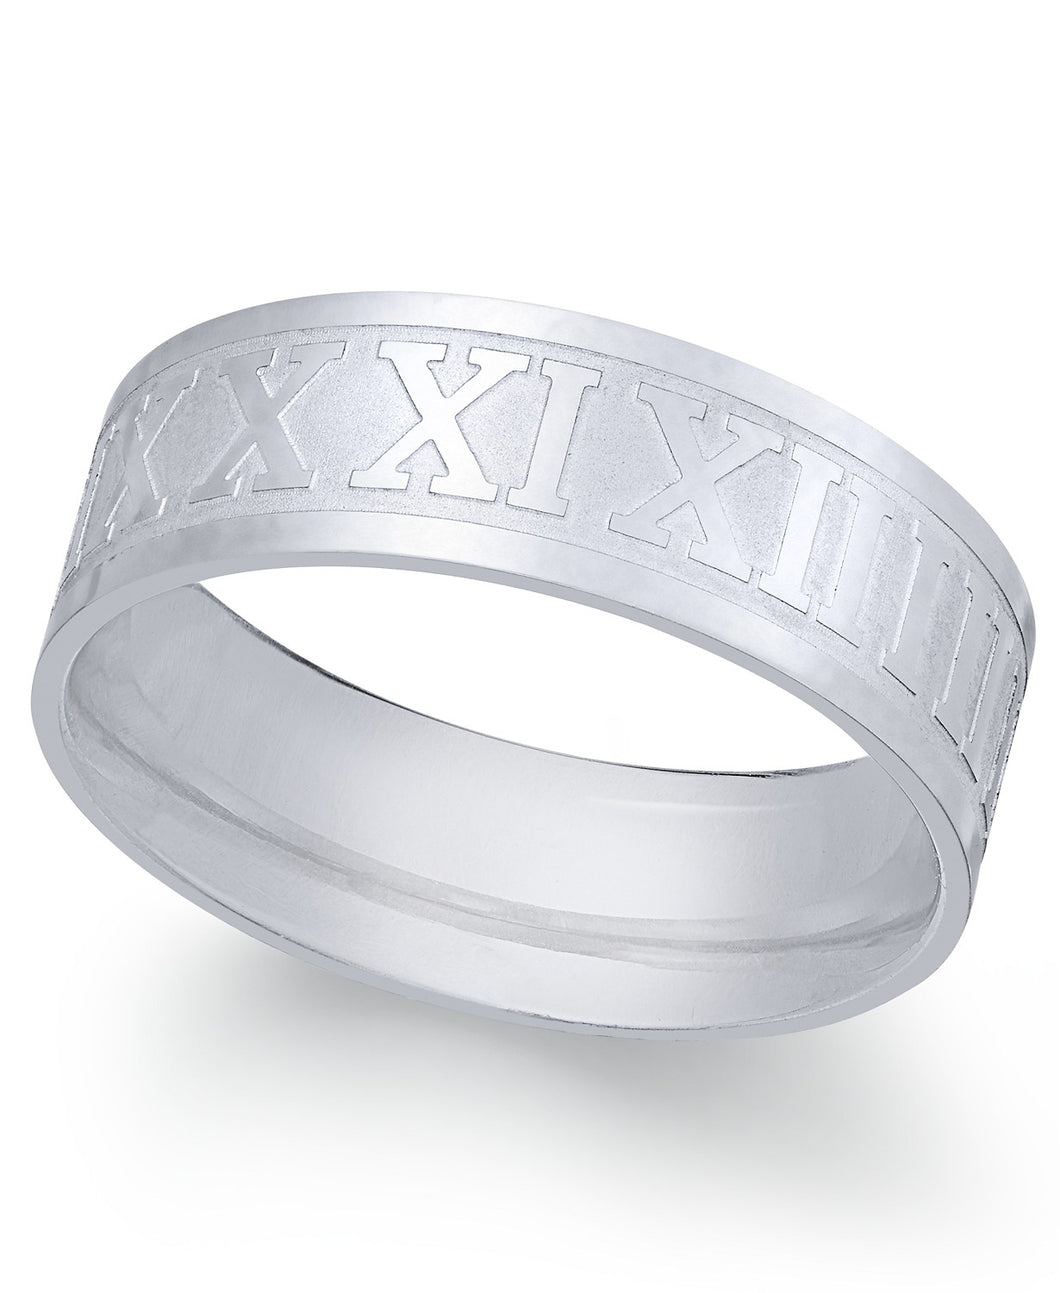 Custom Cut Out Ring | Roman Numeral Rings | Capsul Jewelry